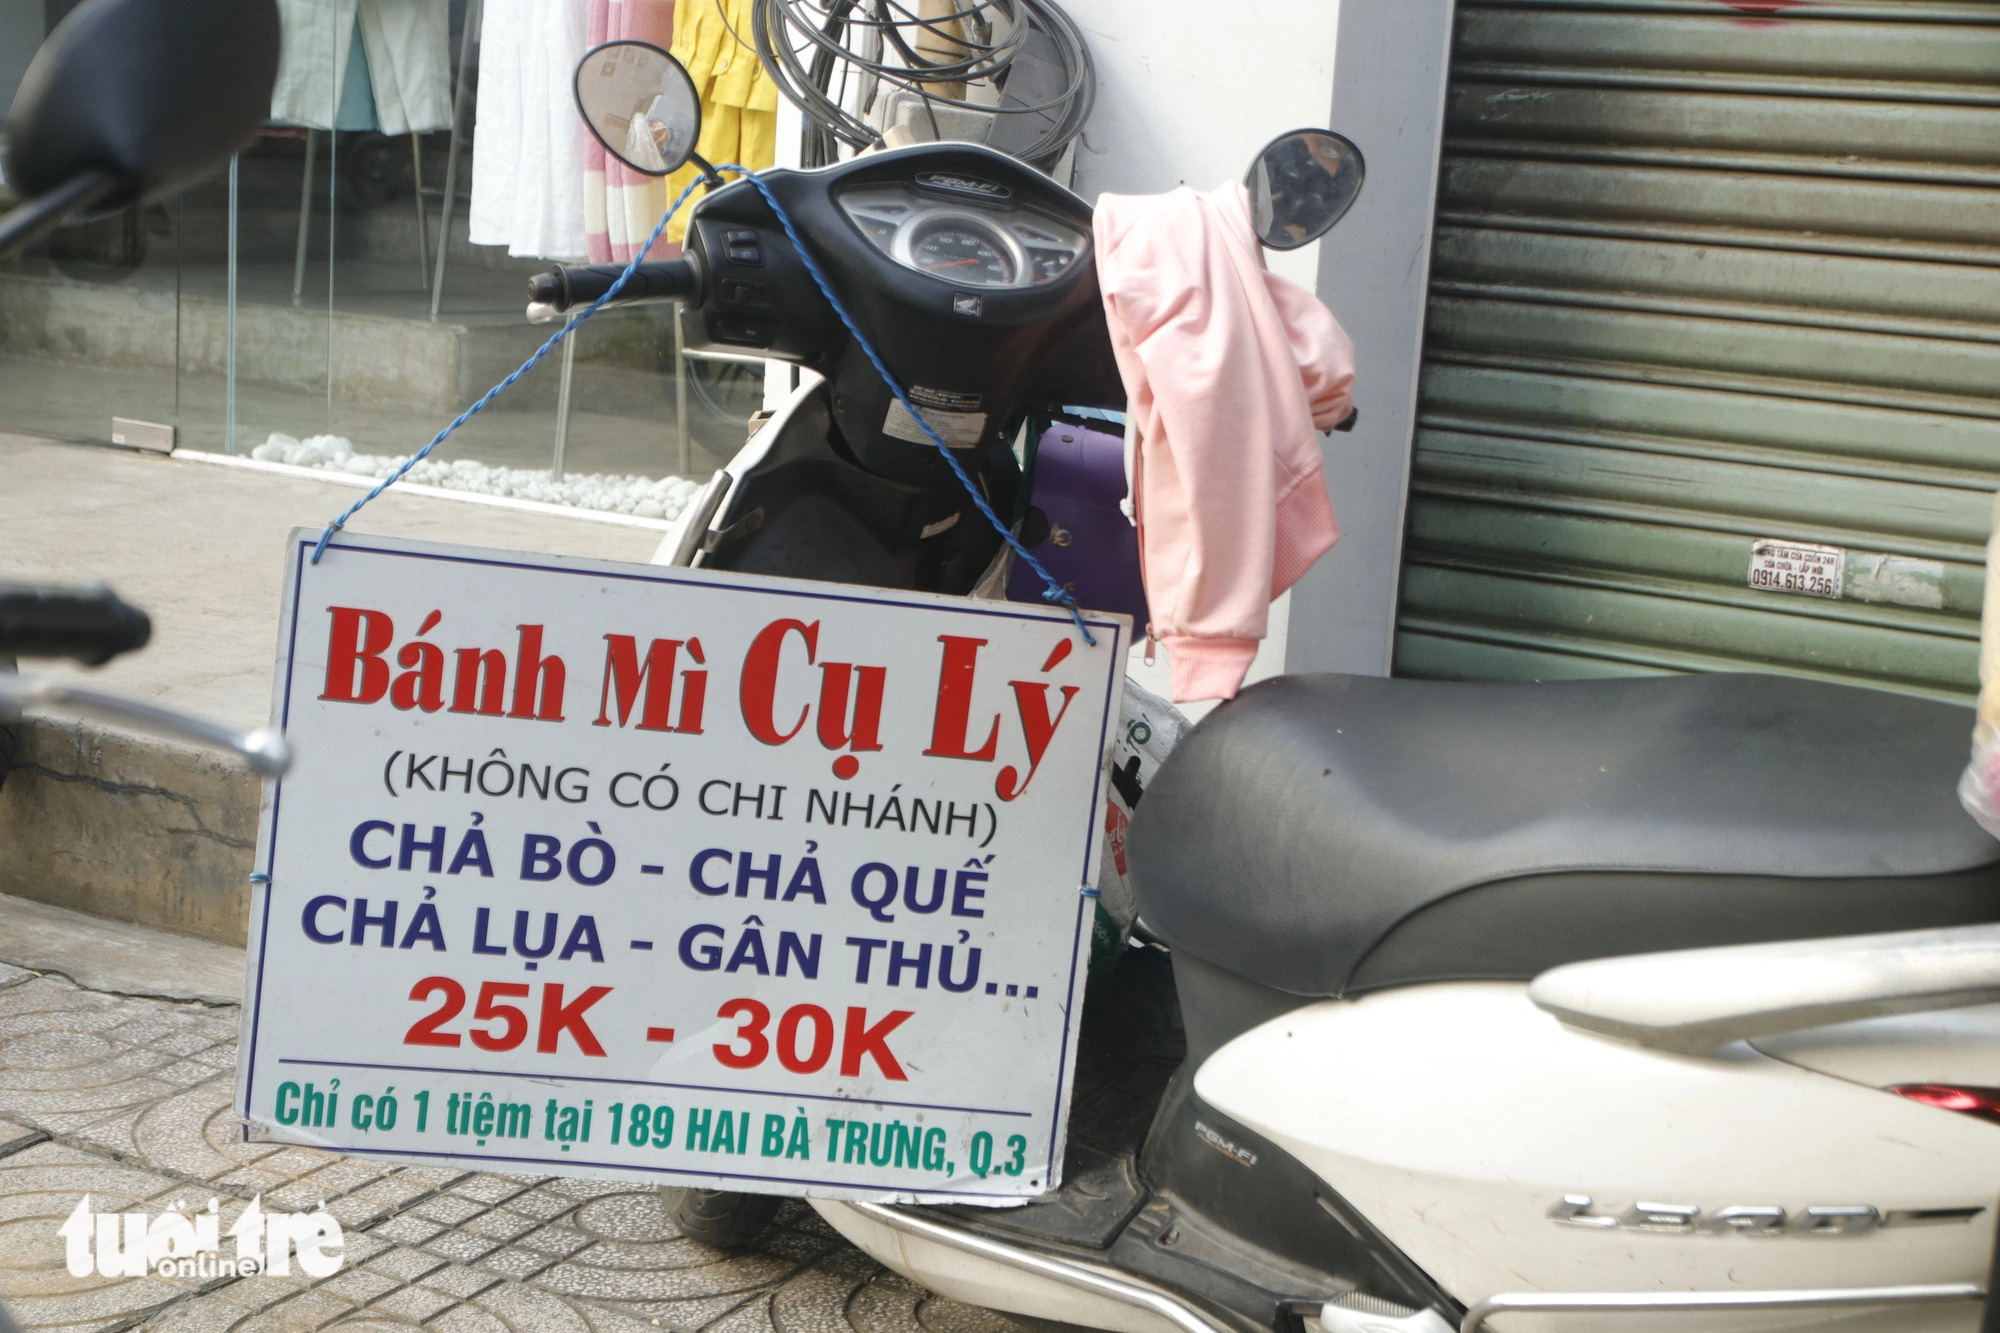 A modest sign for Mr. Ly’s 'banh mi' stall hangs on a motorbike. Photo: Ho Lam / Tuoi Tre